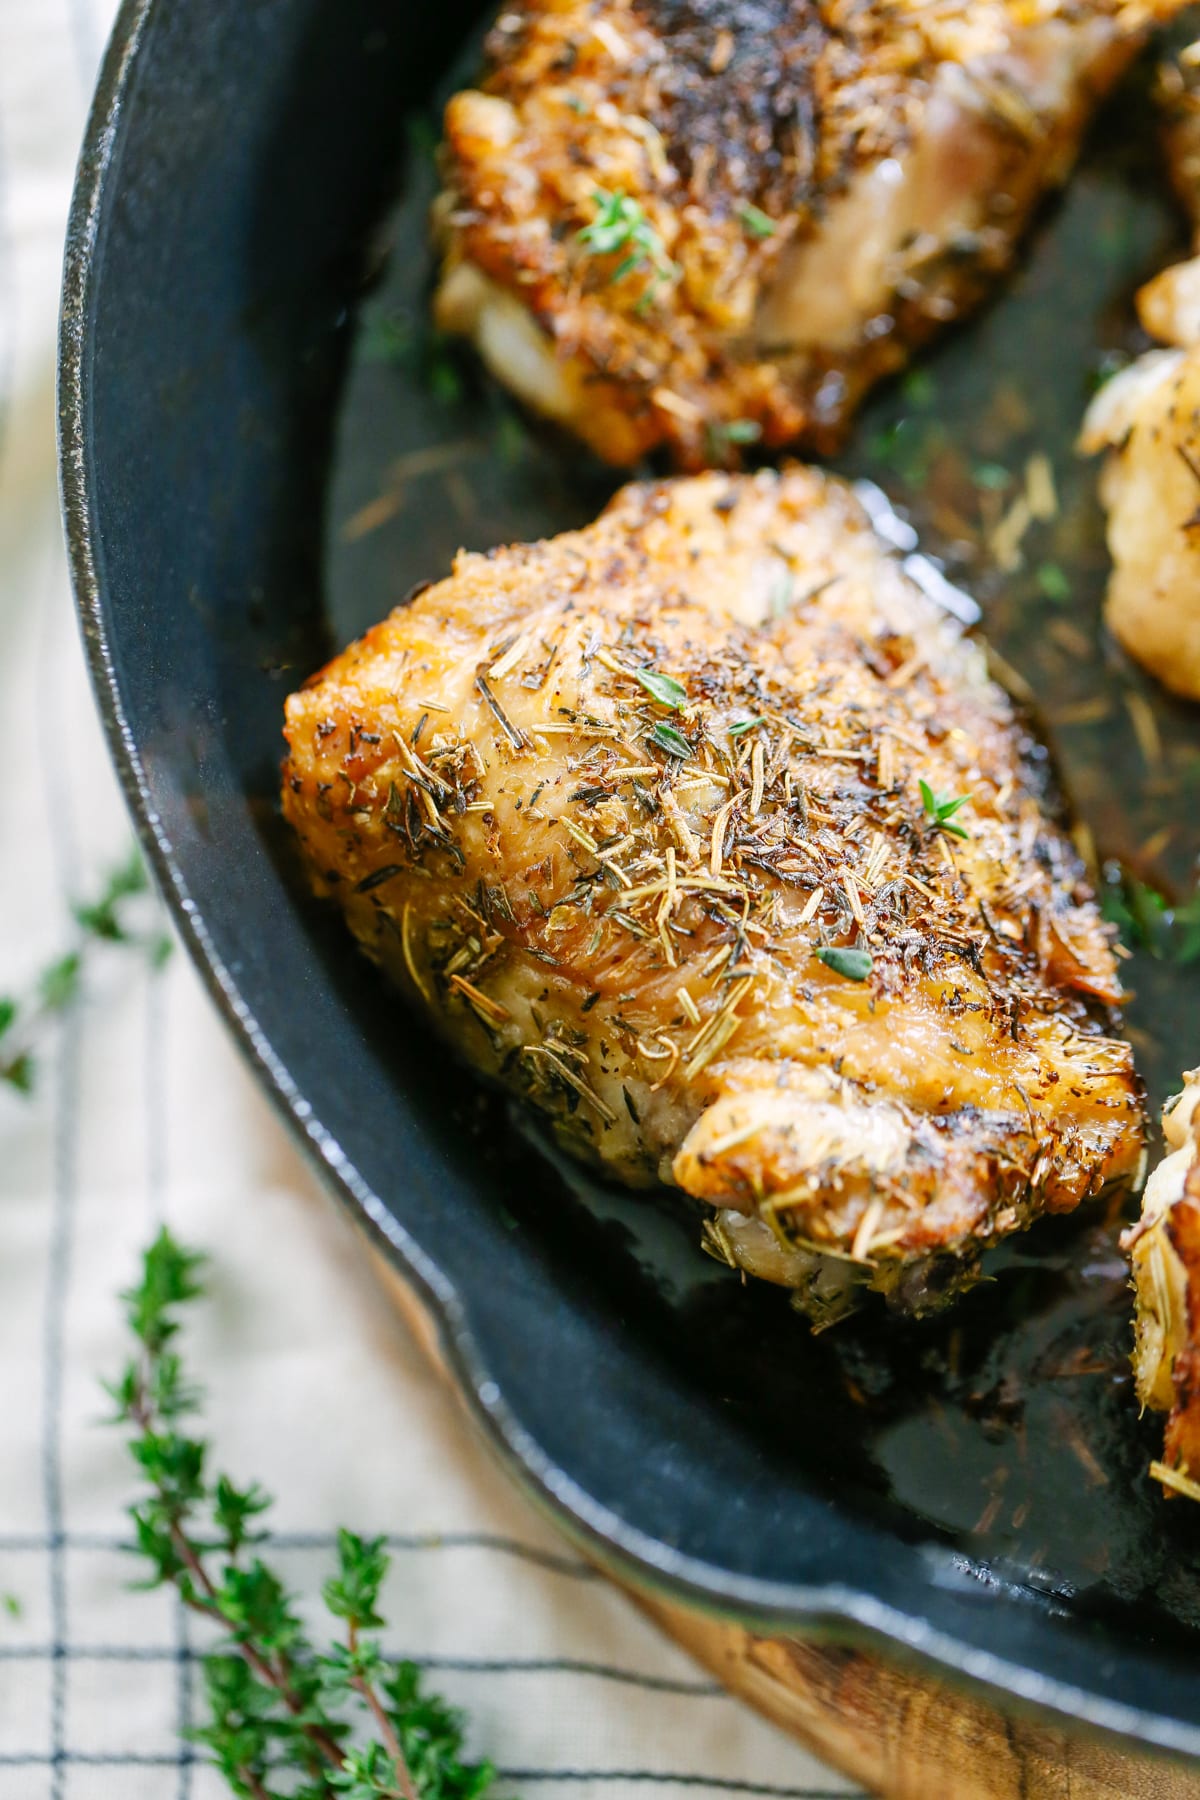 Crispy Herb-Roasted Chicken Thighs! Sooo good and so easy! I make these for dinner at least once week.